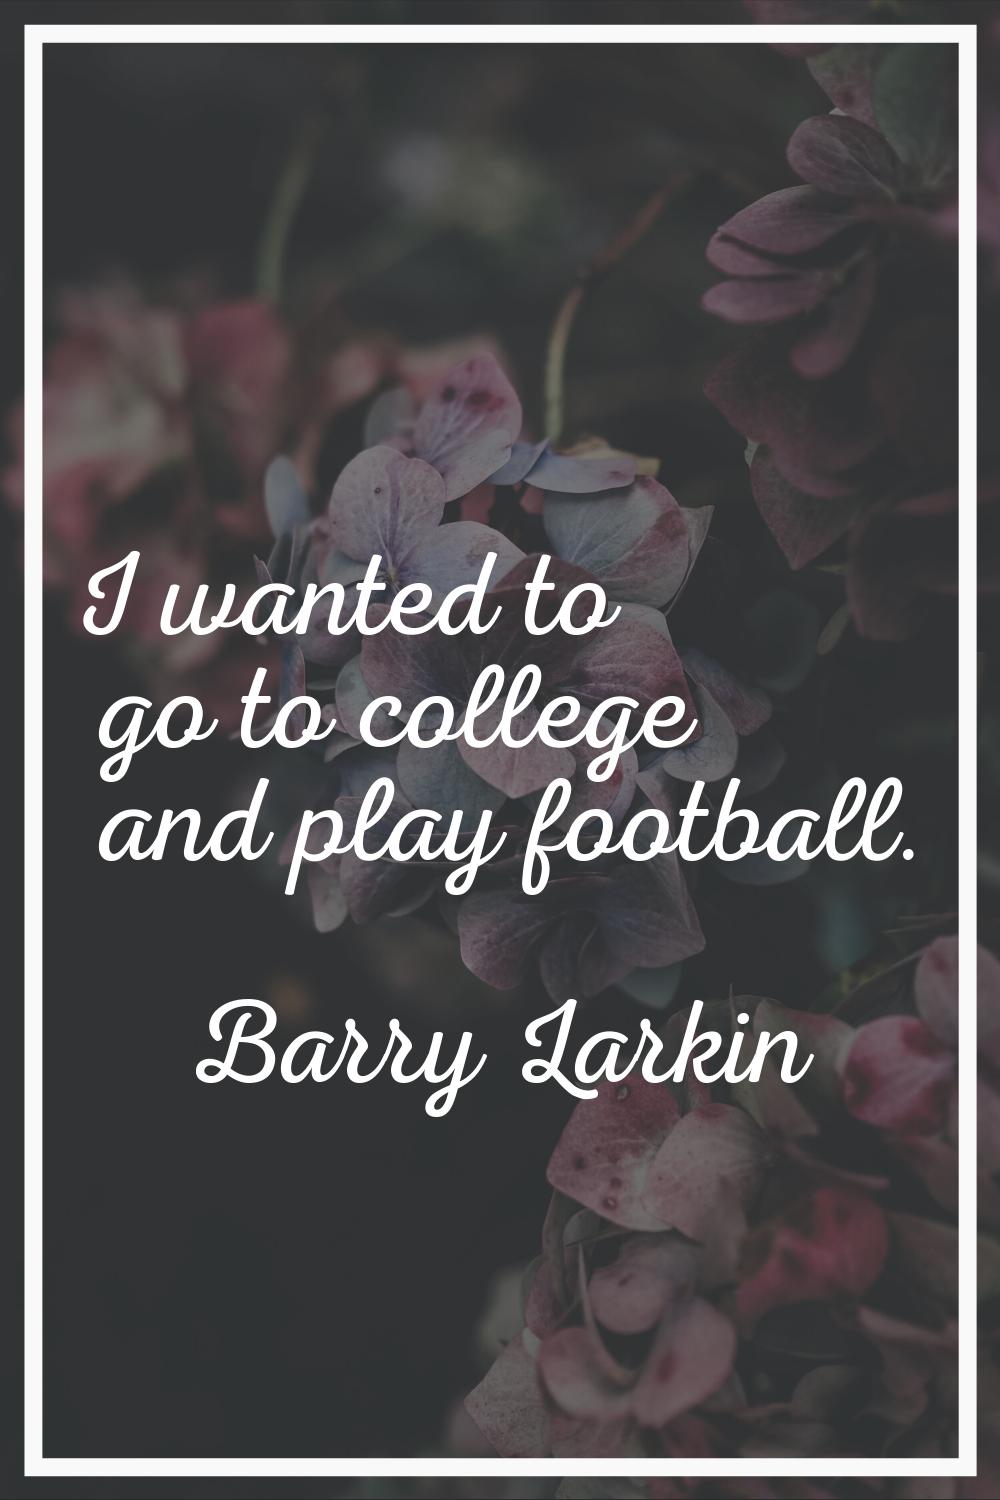 I wanted to go to college and play football.